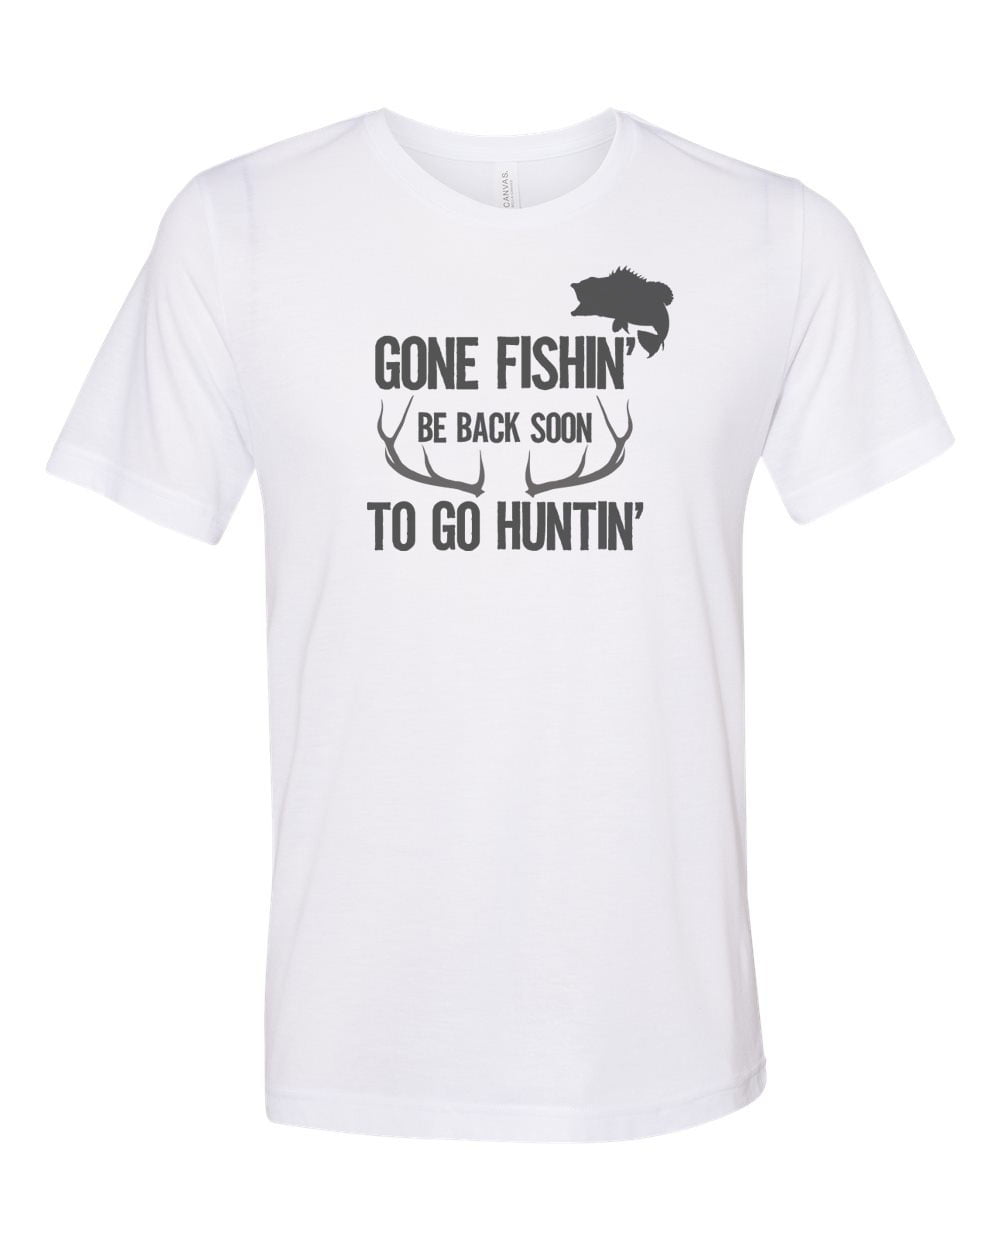 Hunting And Fishing Shirt, Gone Fishin' Be Back To Soon To Go Huntin',  Sublimation Tee, Fishing Shirt, Hunting Shirt, Dad Tee, Father's Day,  White, SMALL 